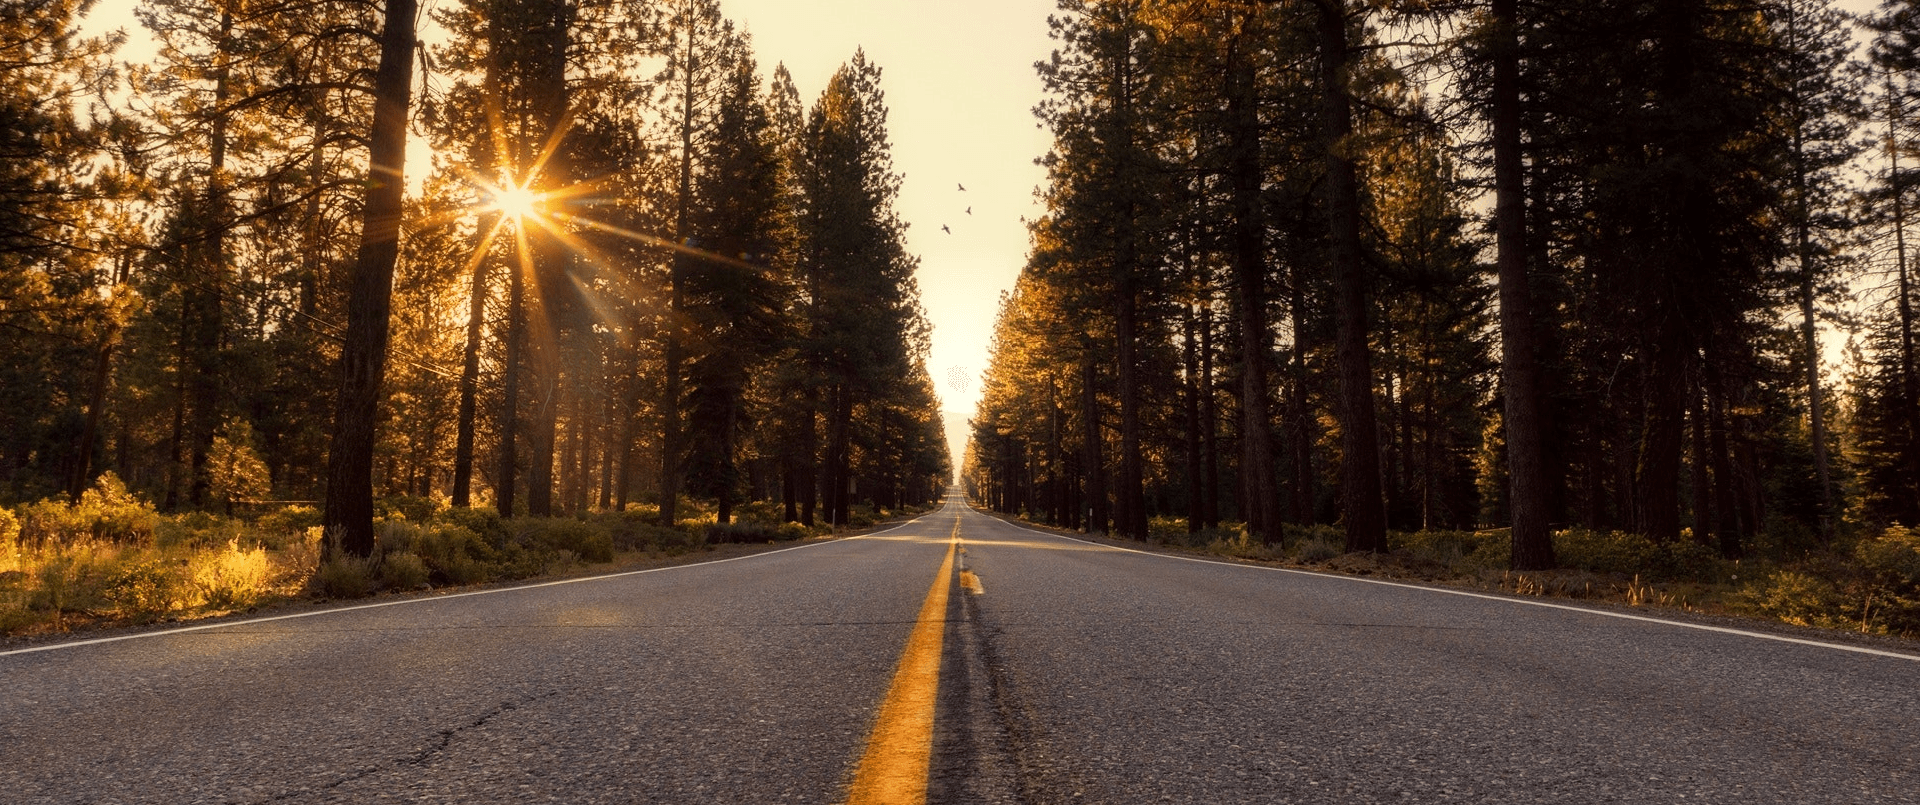 Photo Looking down a road at Sunset